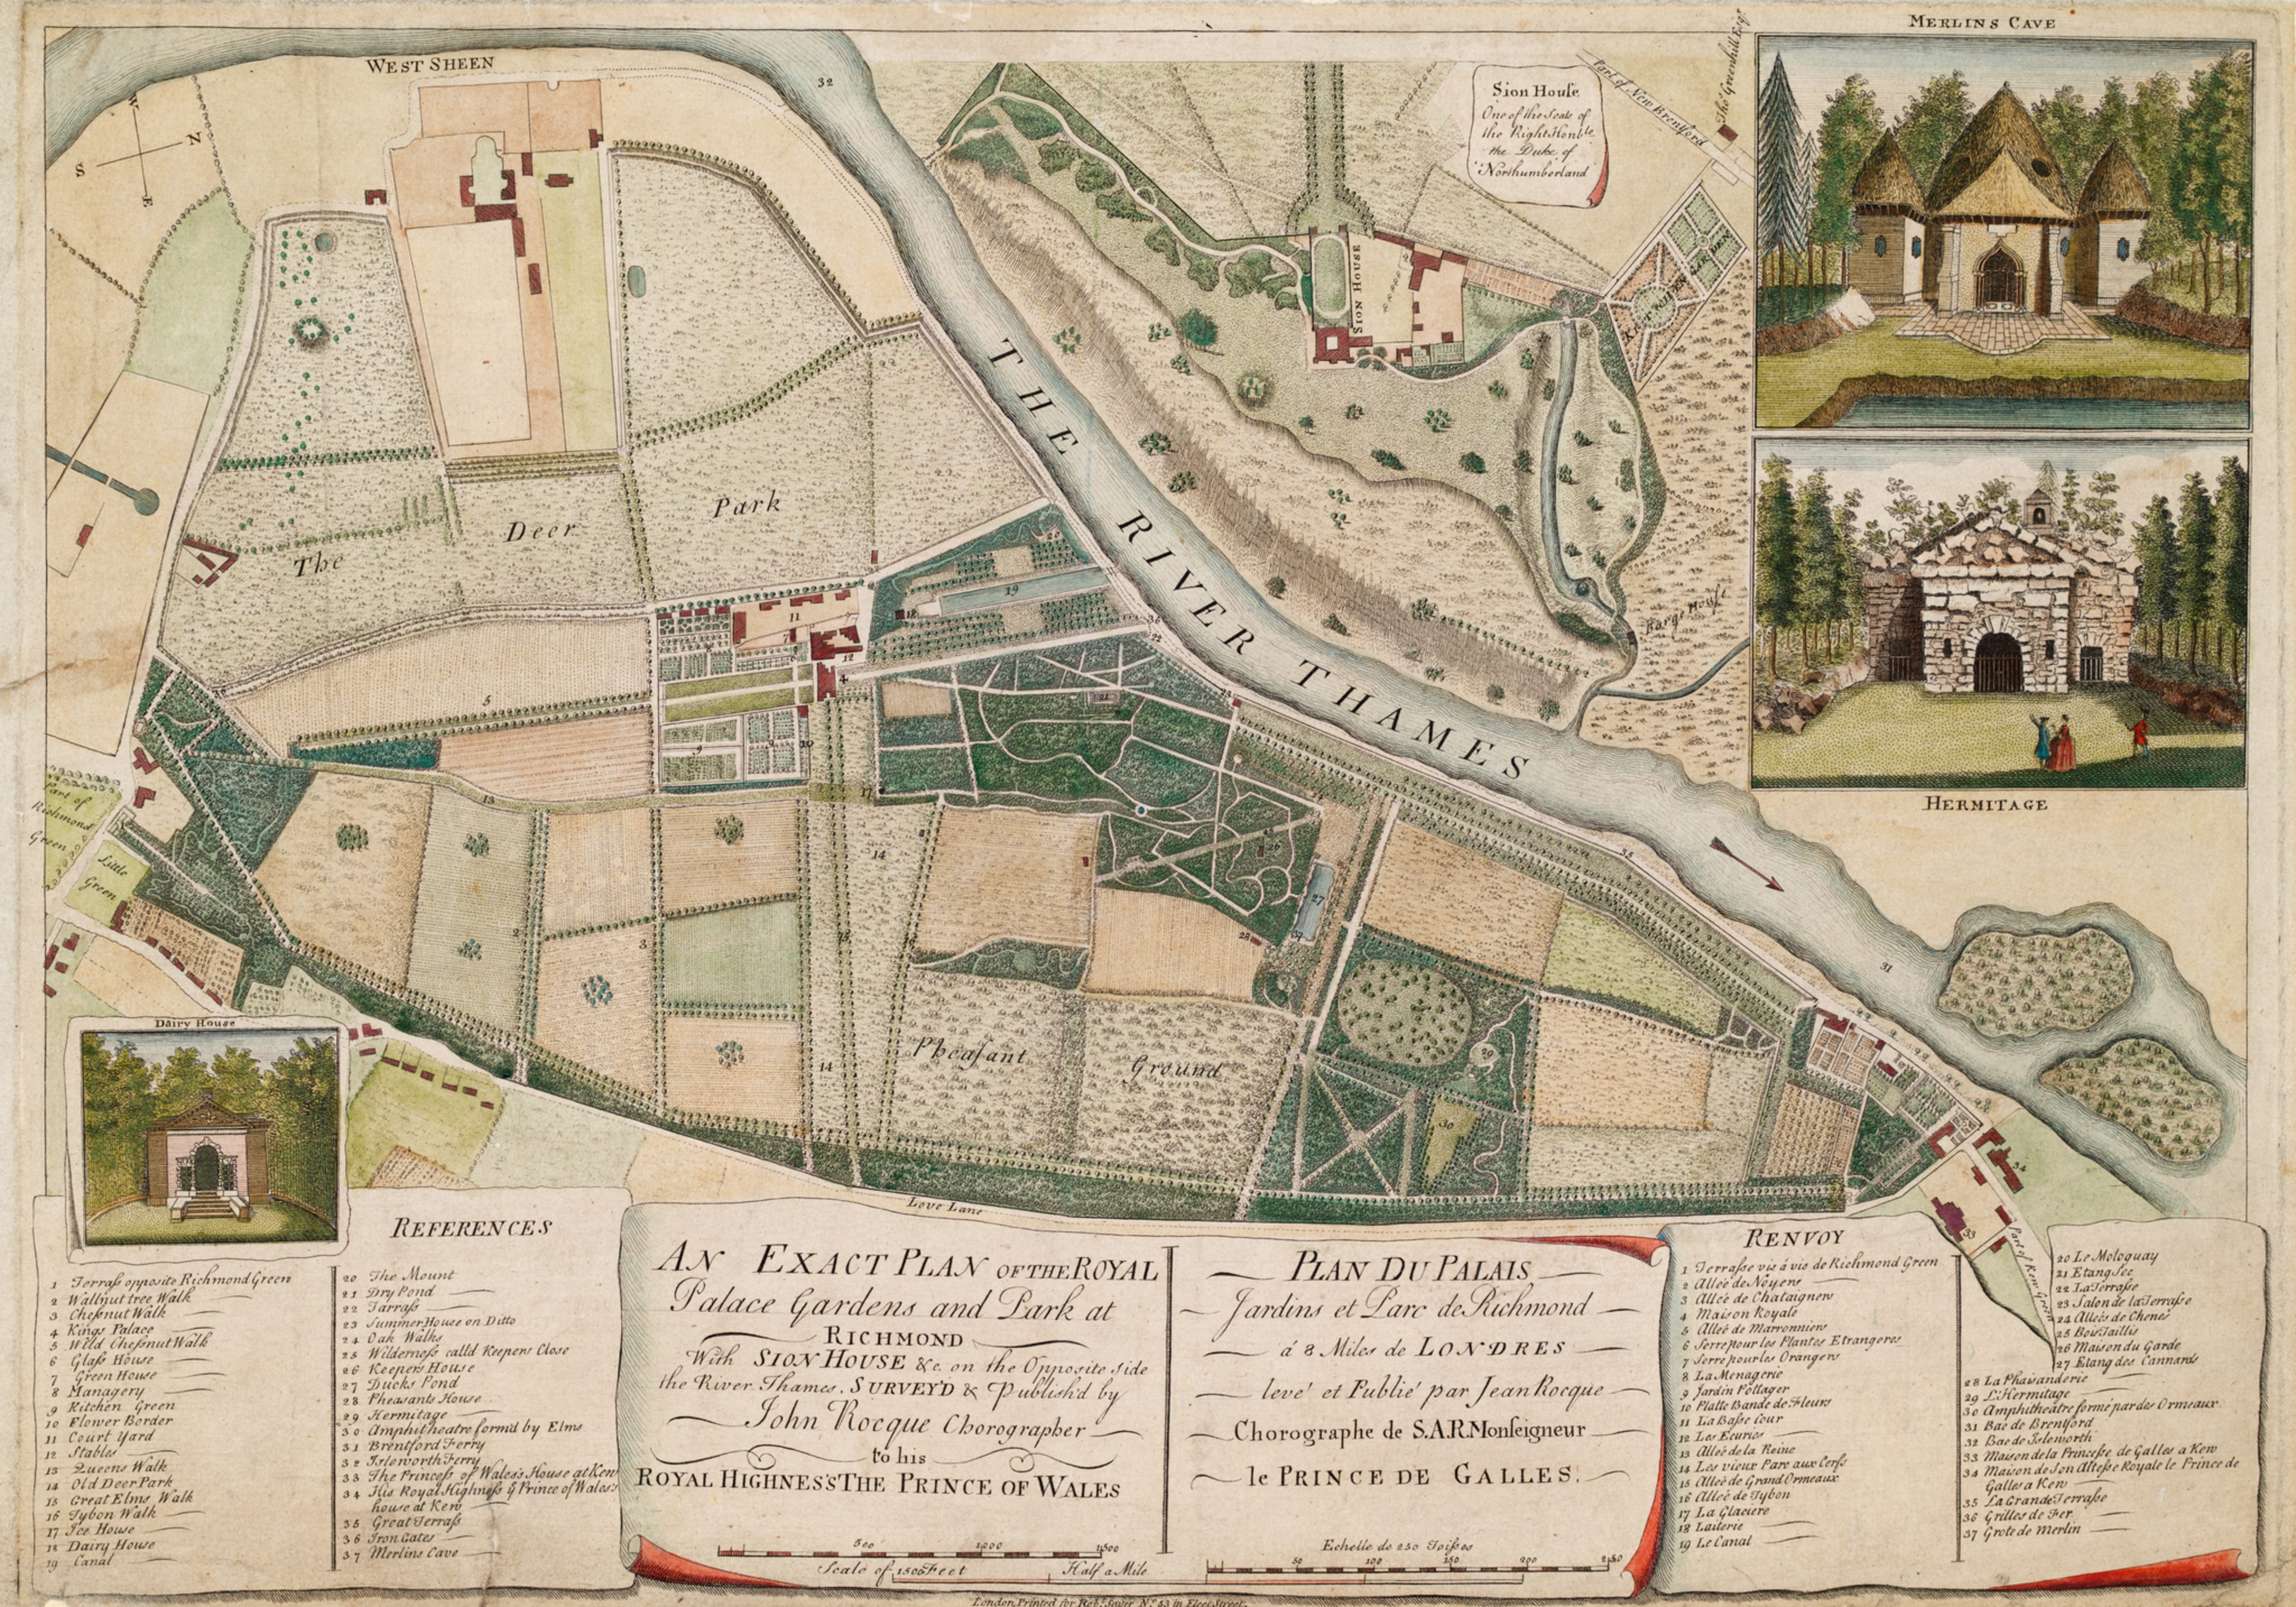 Plan of the Royal Palace Gardens and Park at Richmond in 1754